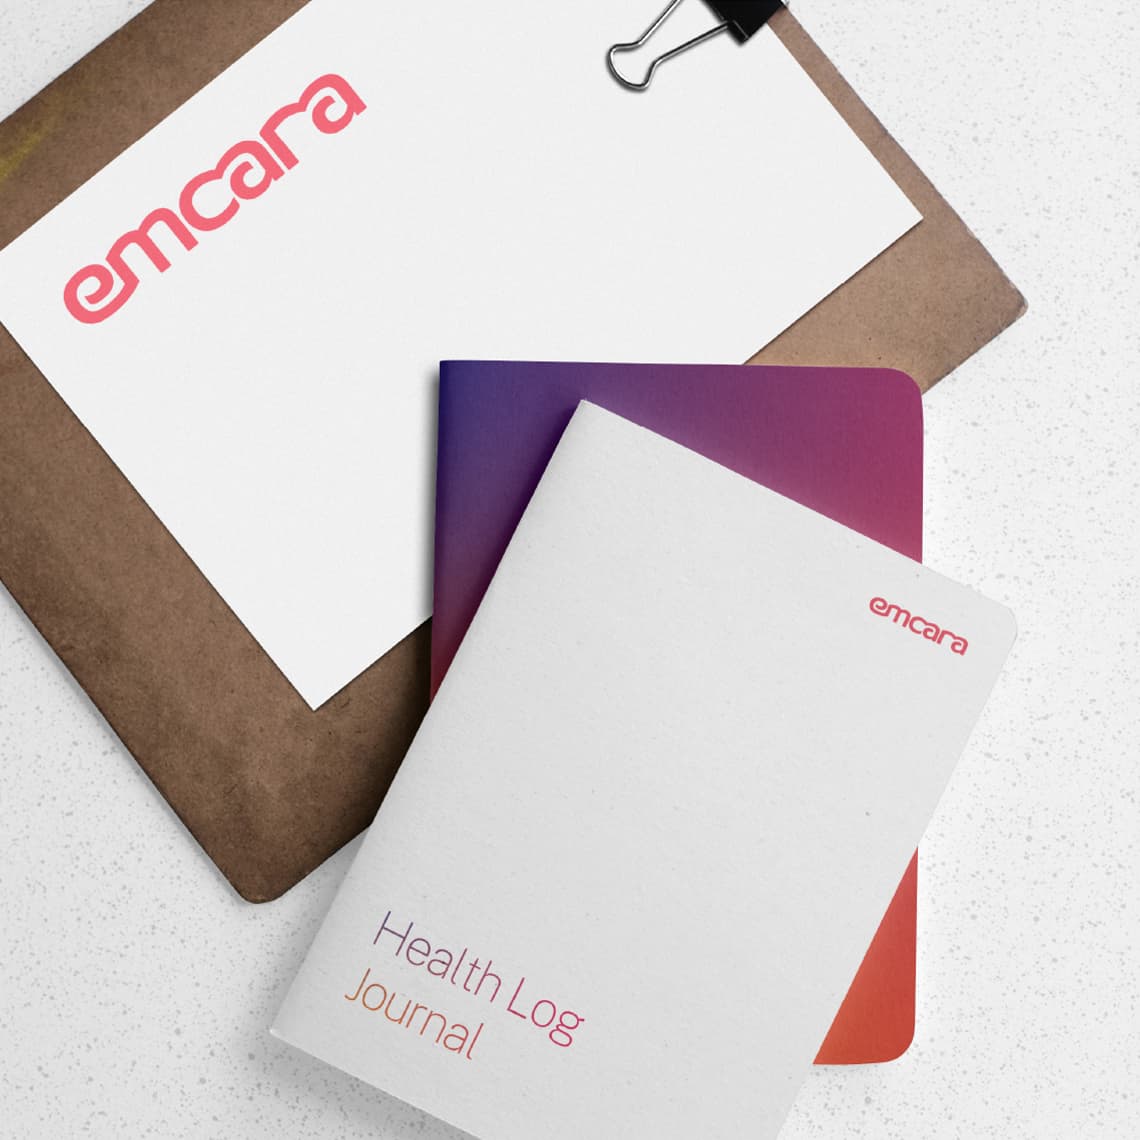 Examples of emcara's design system applied to printed material